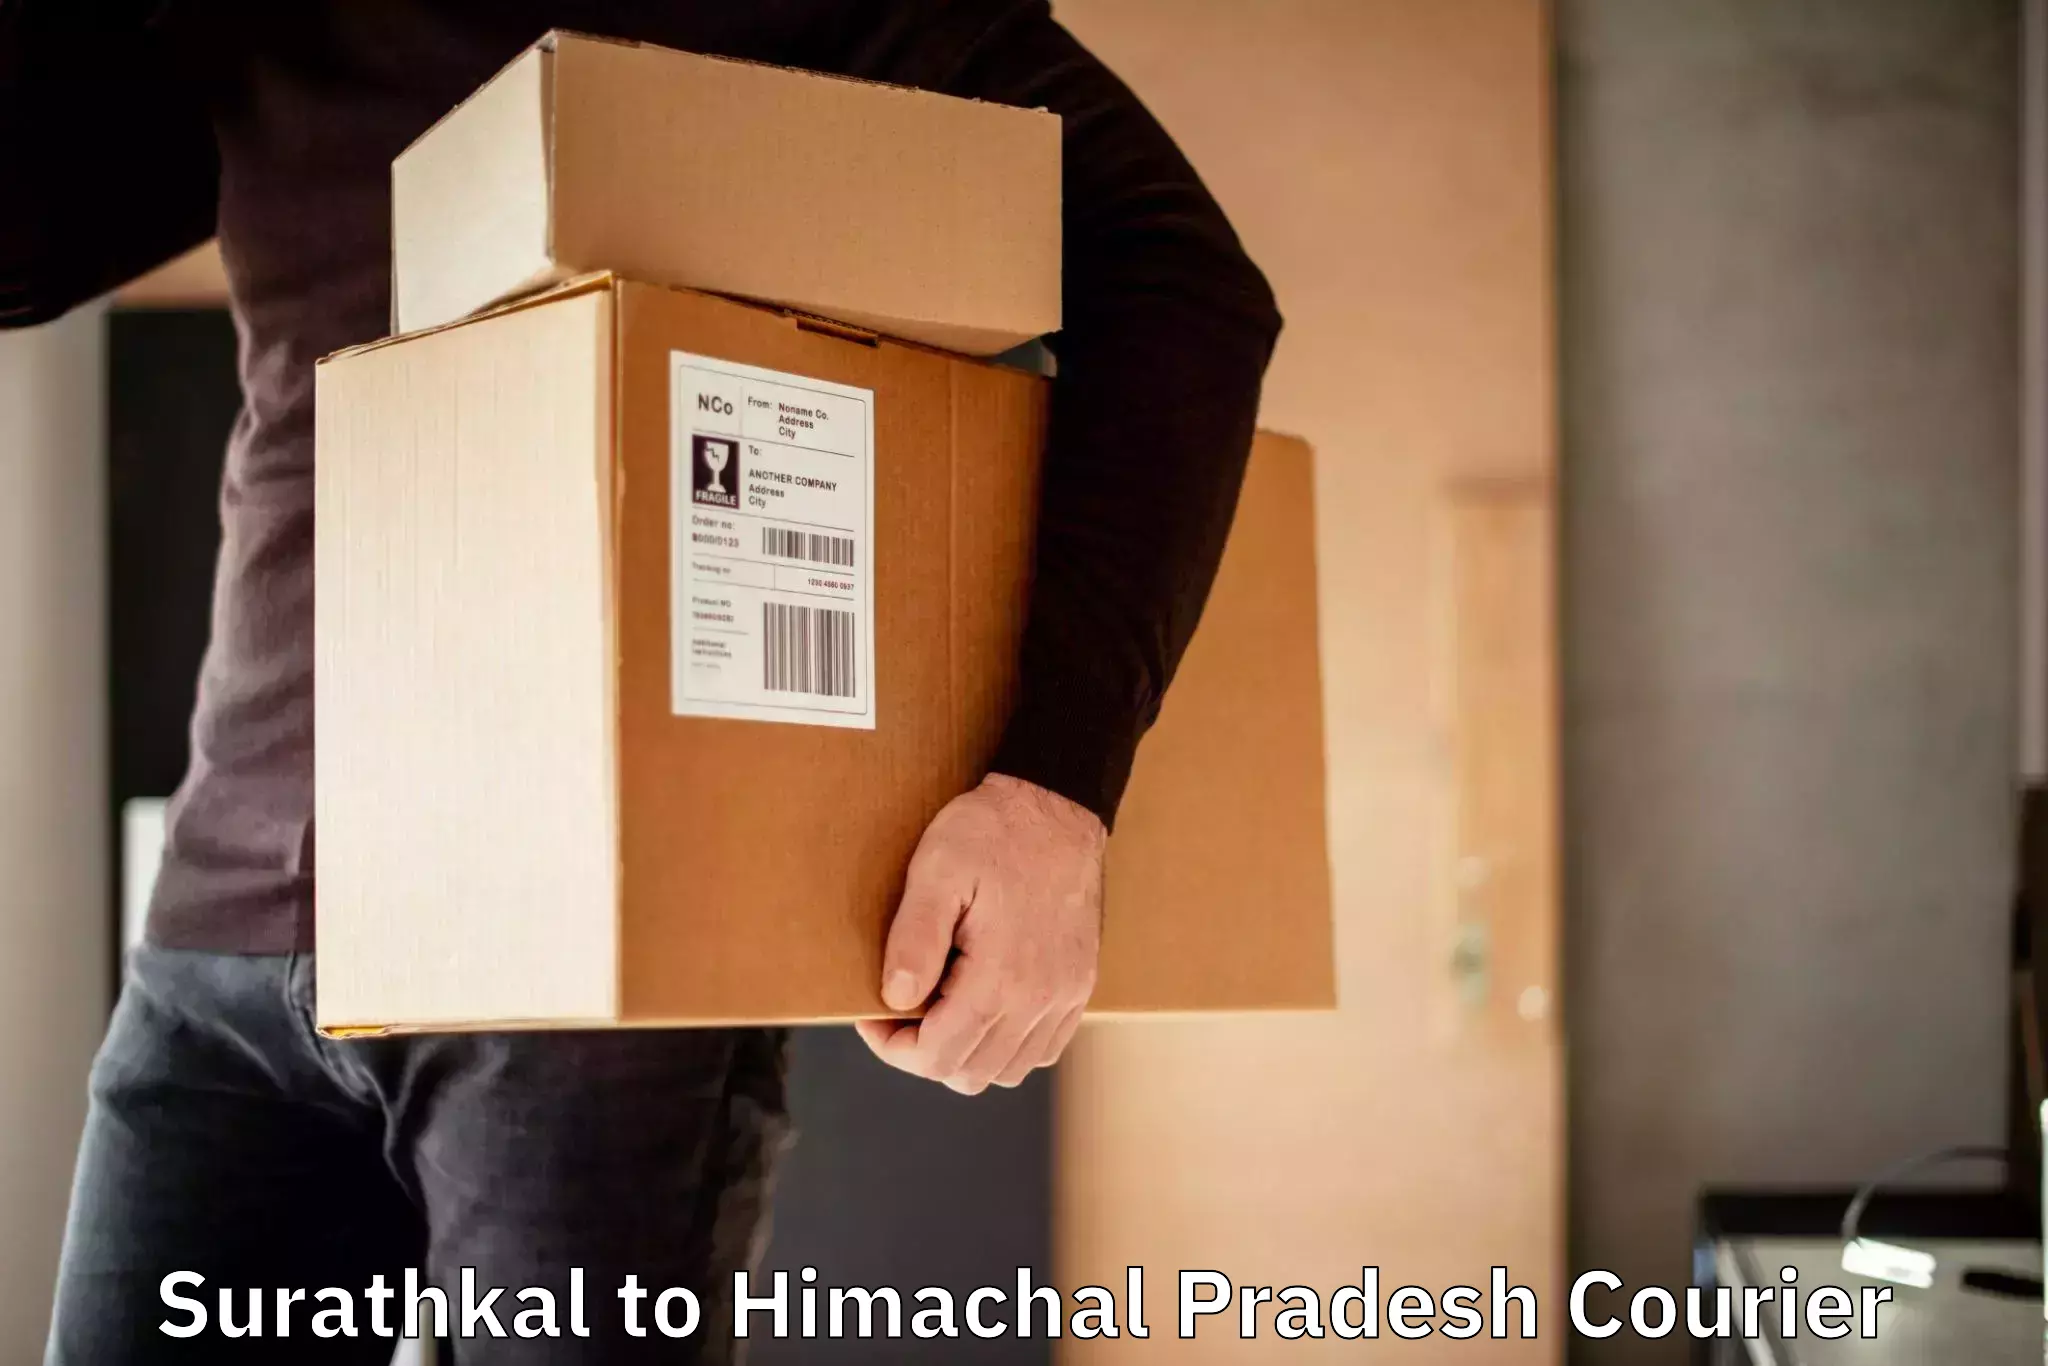 Secure freight services Surathkal to Una Himachal Pradesh